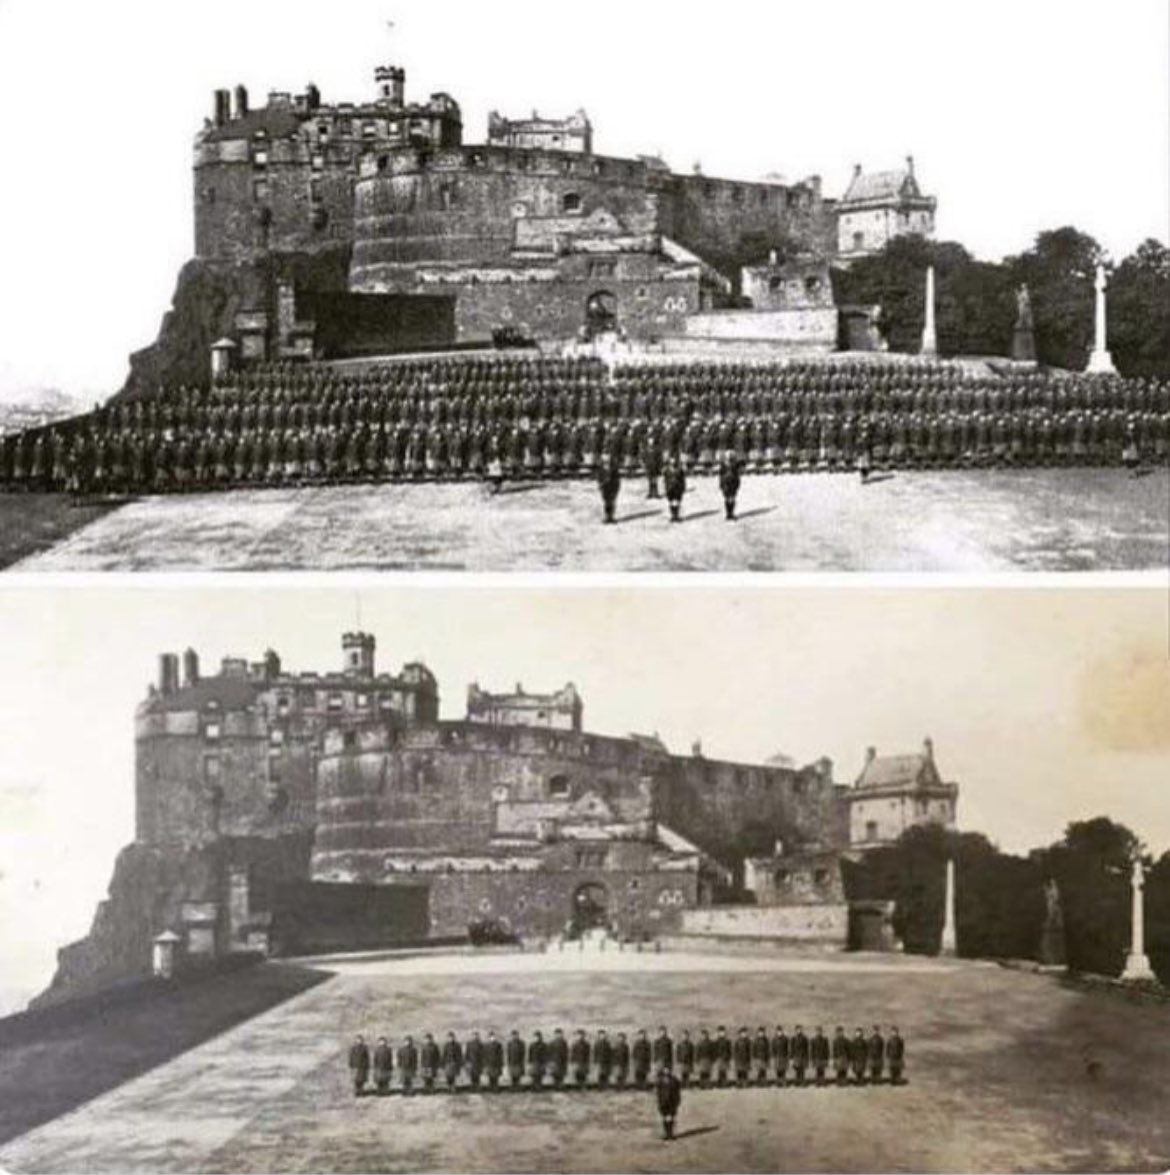 The top photo is a battalion of the Cameron Highlanders in 1914, prior to being despatched to the front line; below is the same battalion upon their return in 1918 after the armistice. War is hell.